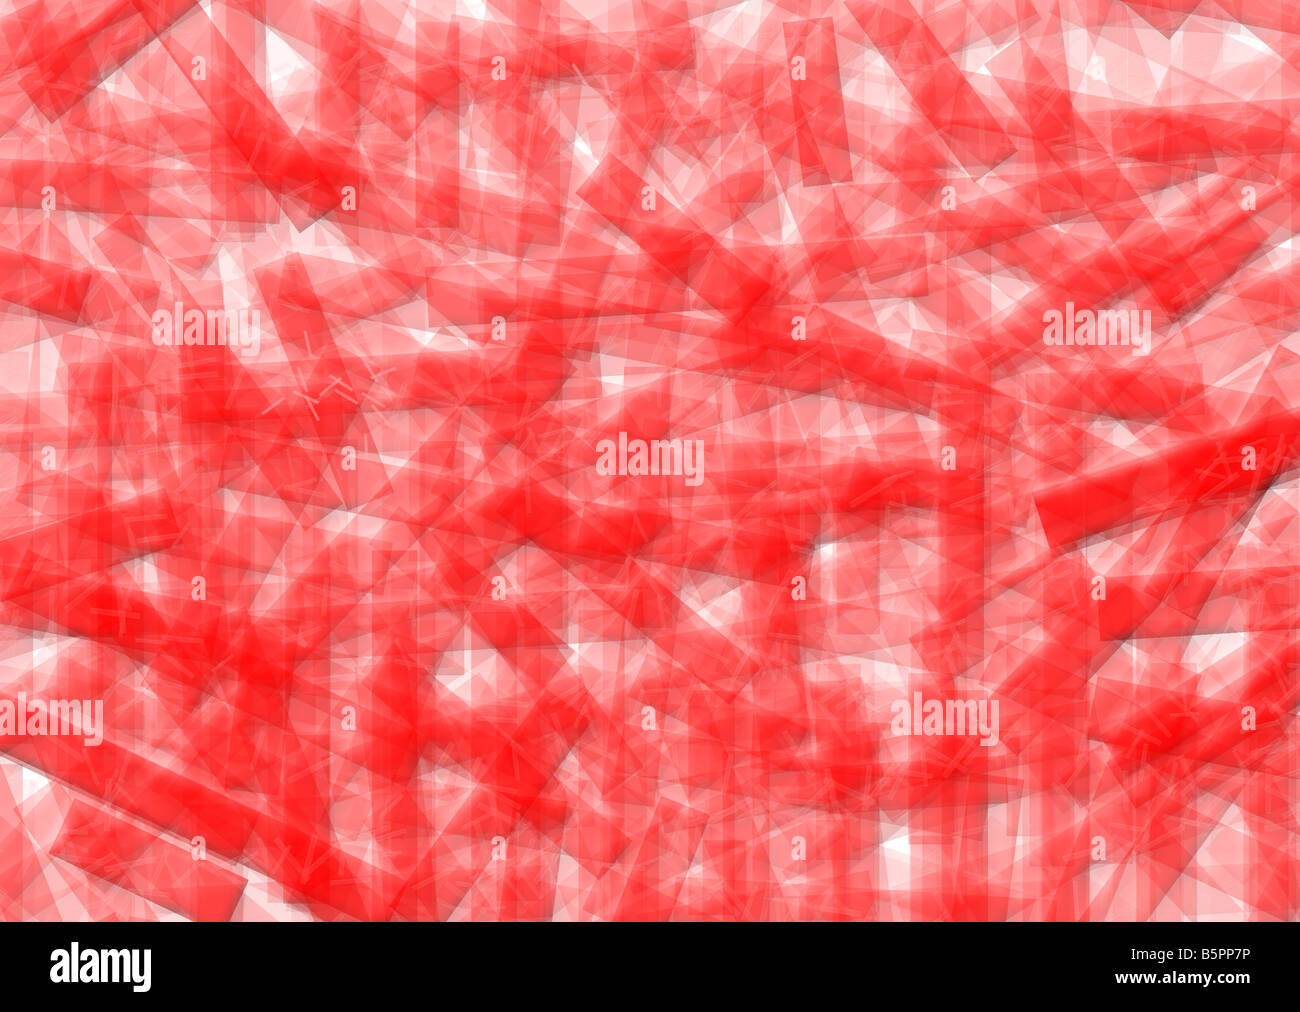 abstract texture, Stock Photo